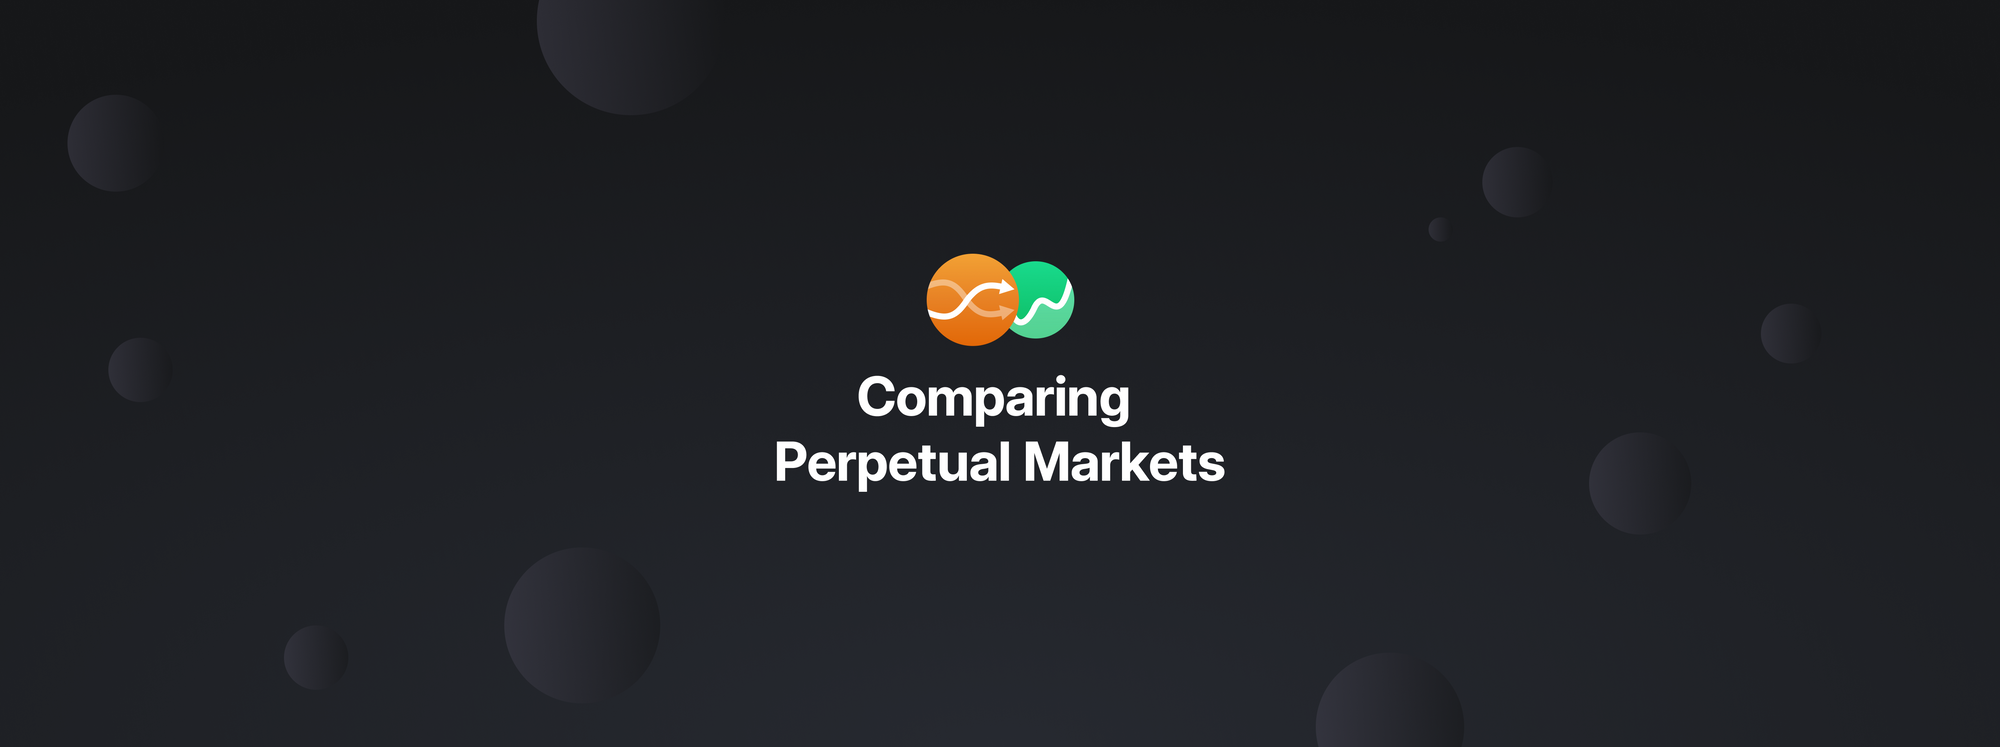 Comparing Perpetual Markets